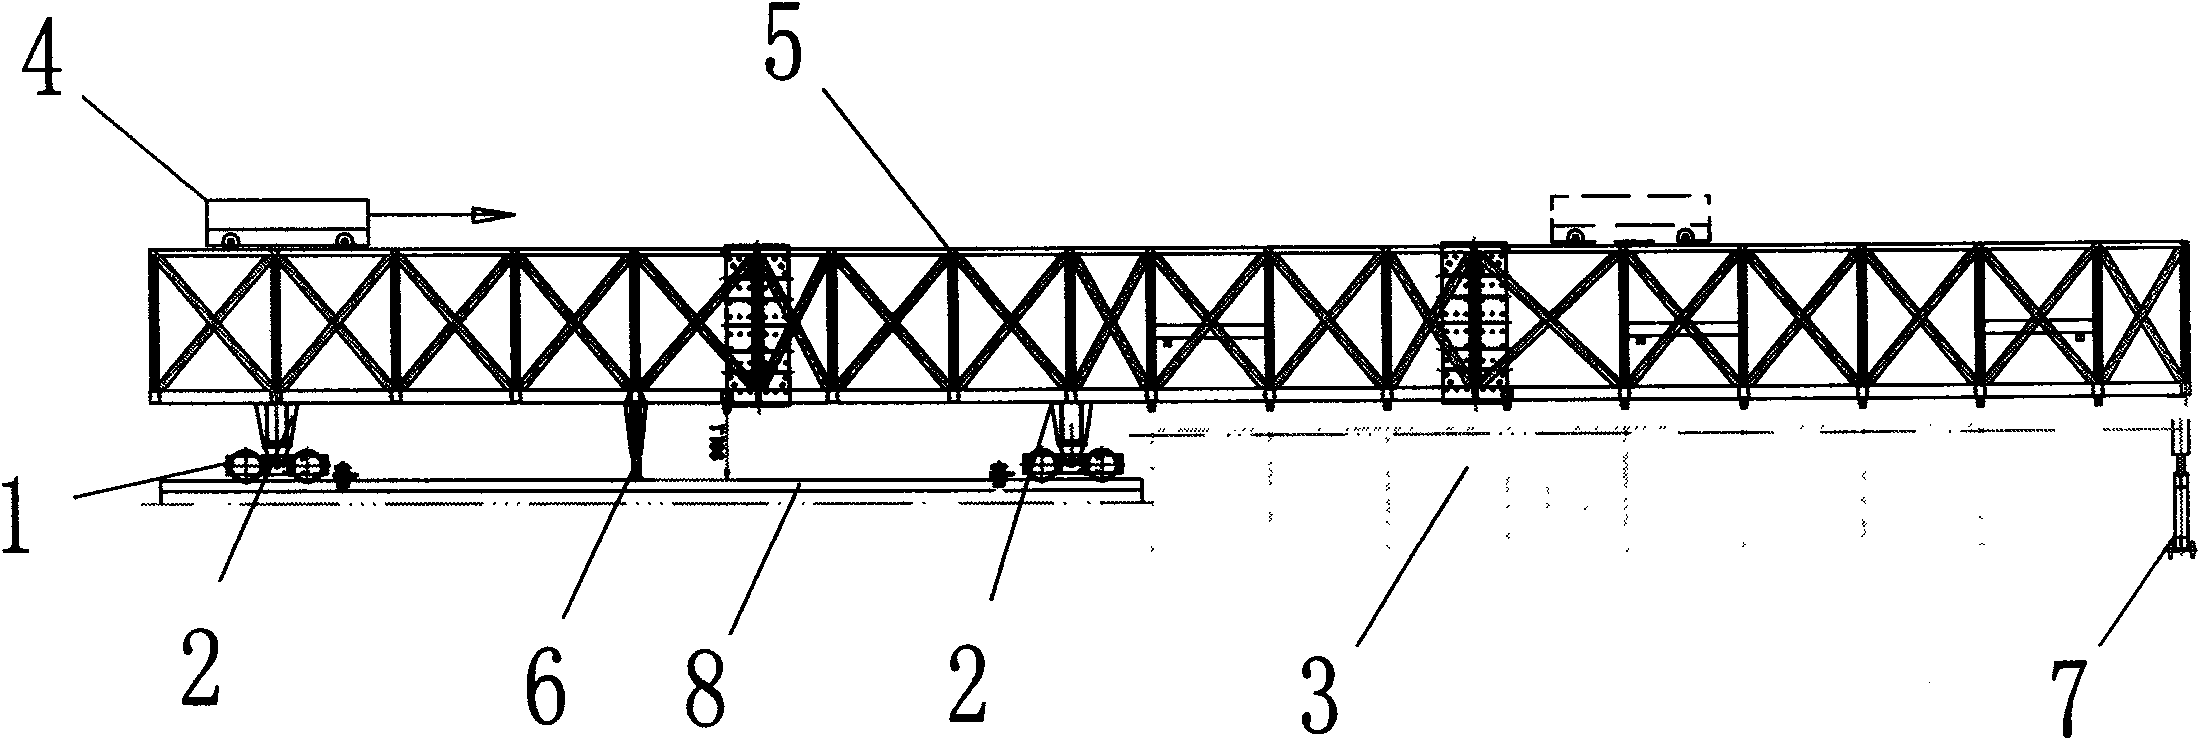 Self-propelled inverted arch template construction method